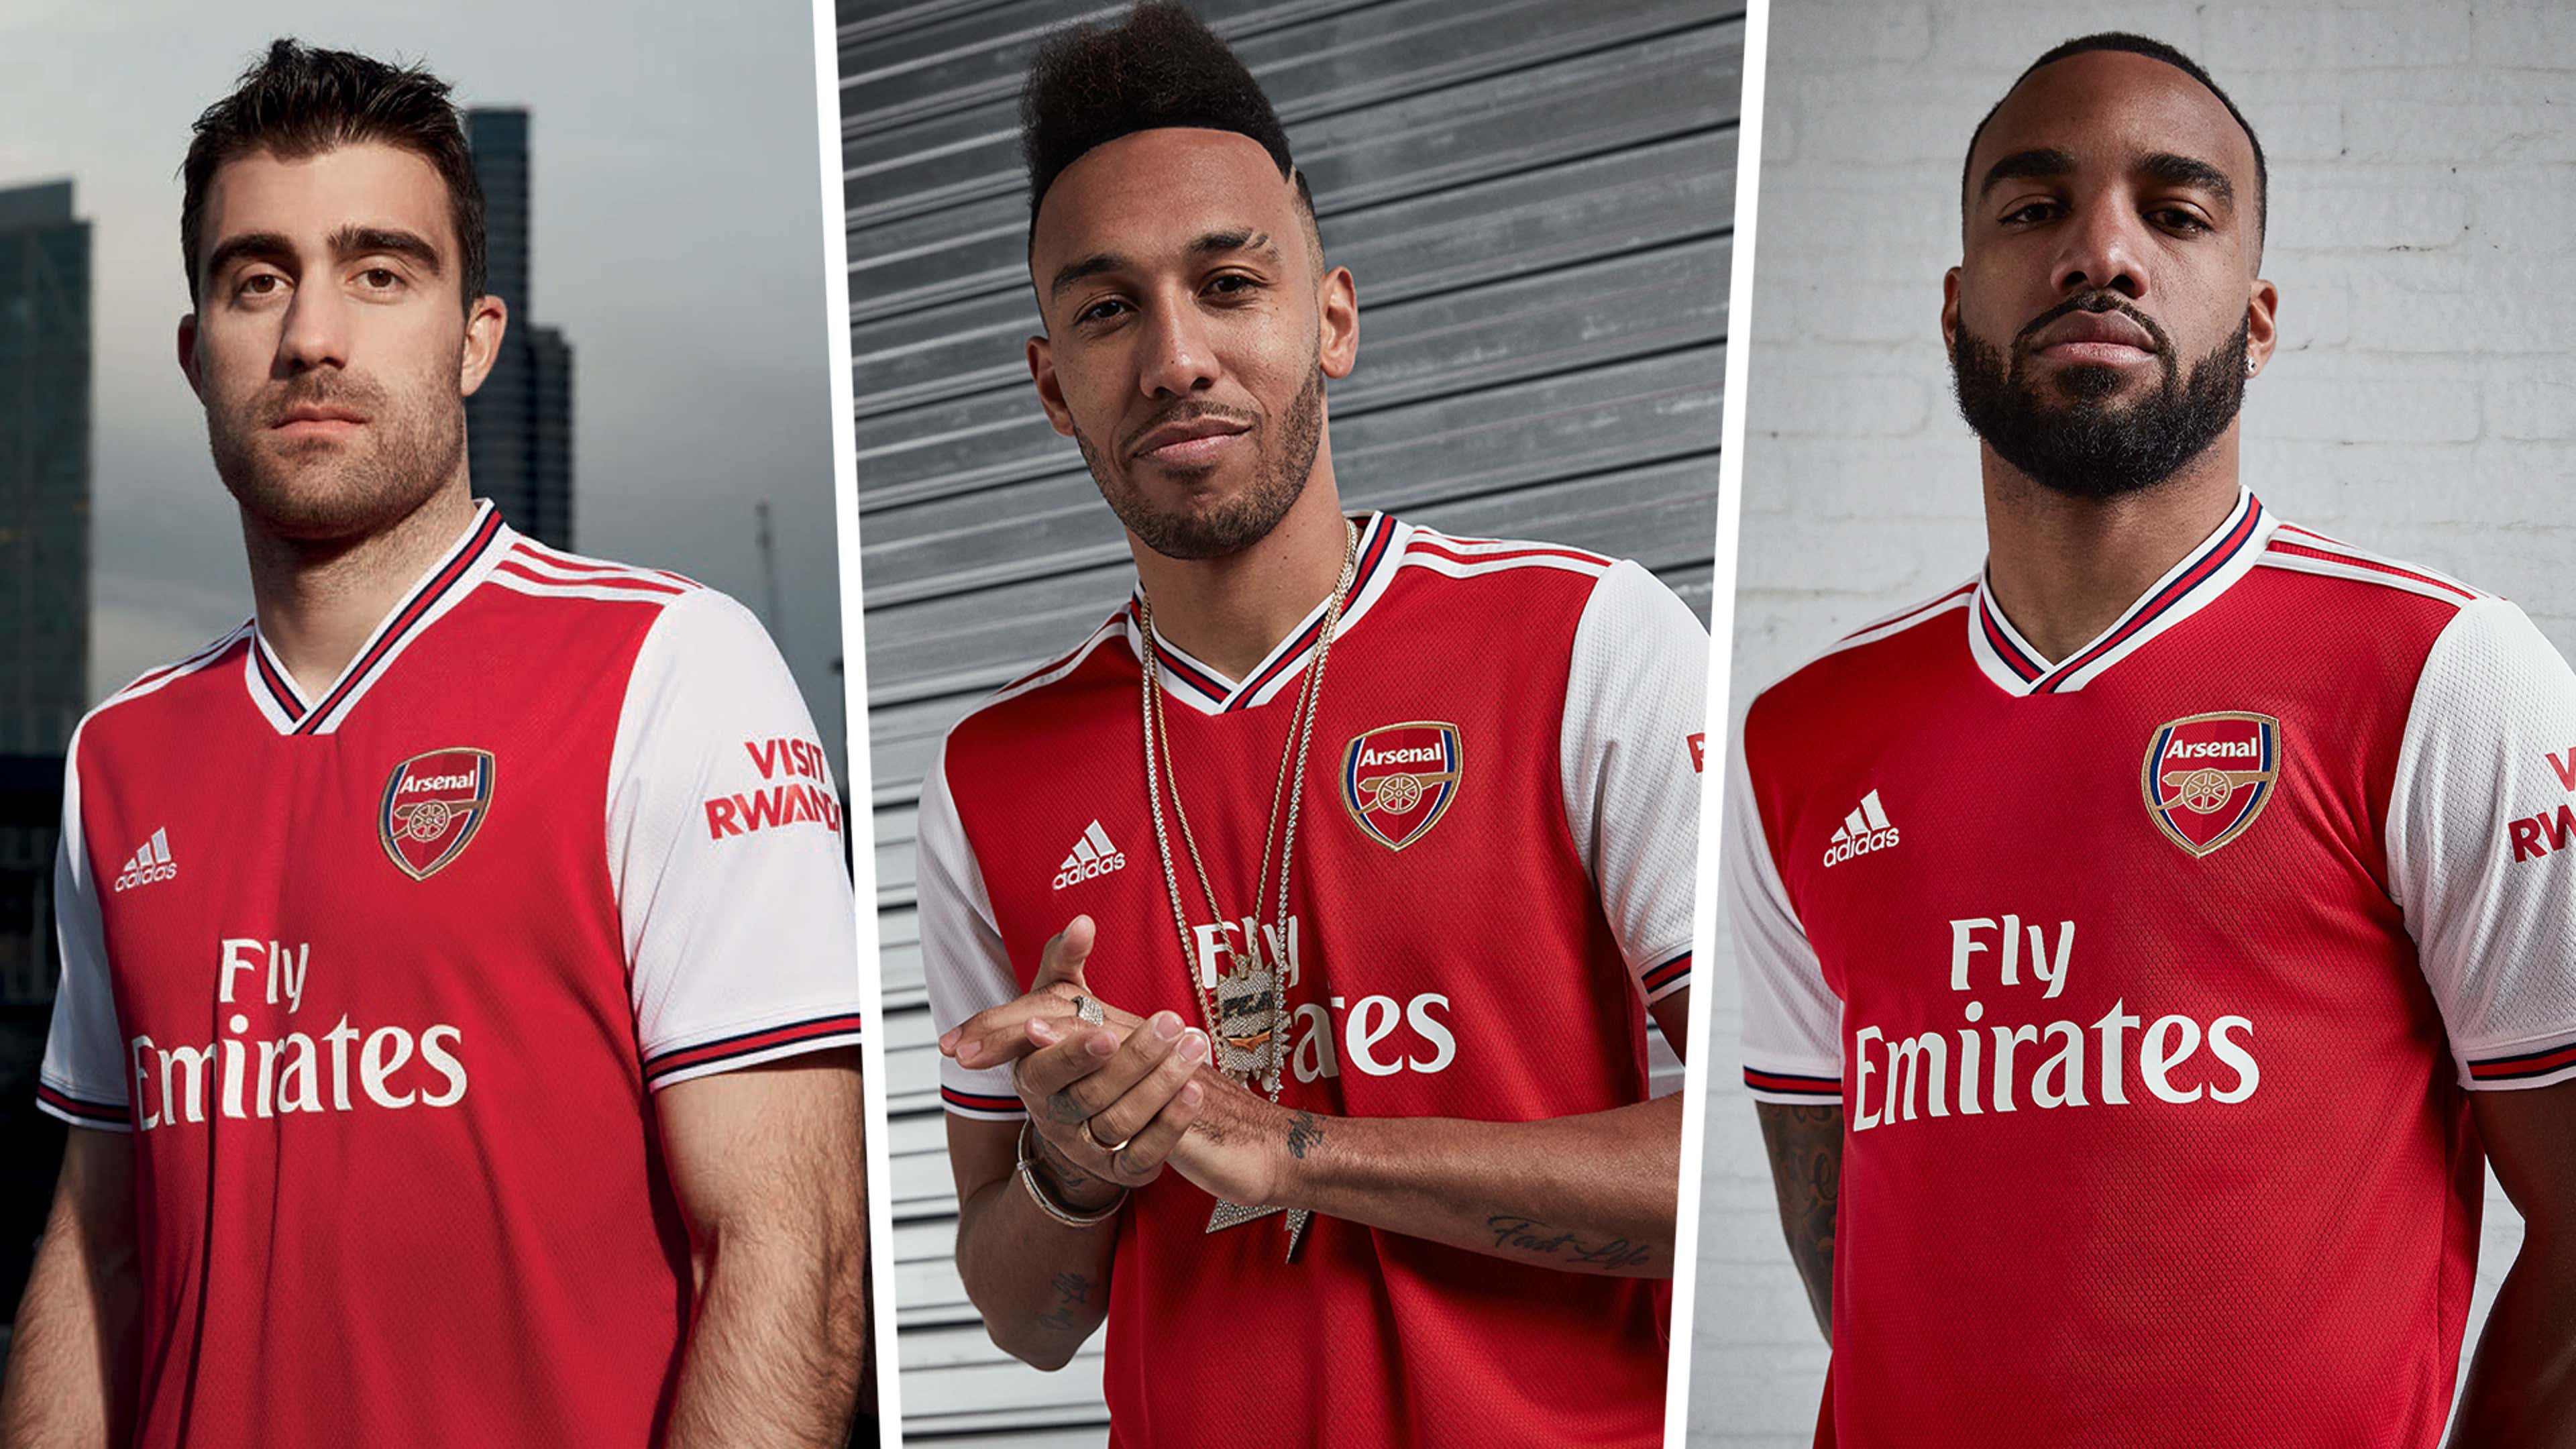 Weekendtas staan weekend adidas and Arsenal form new partnership with 2019/20 home kit | Goal.com UK